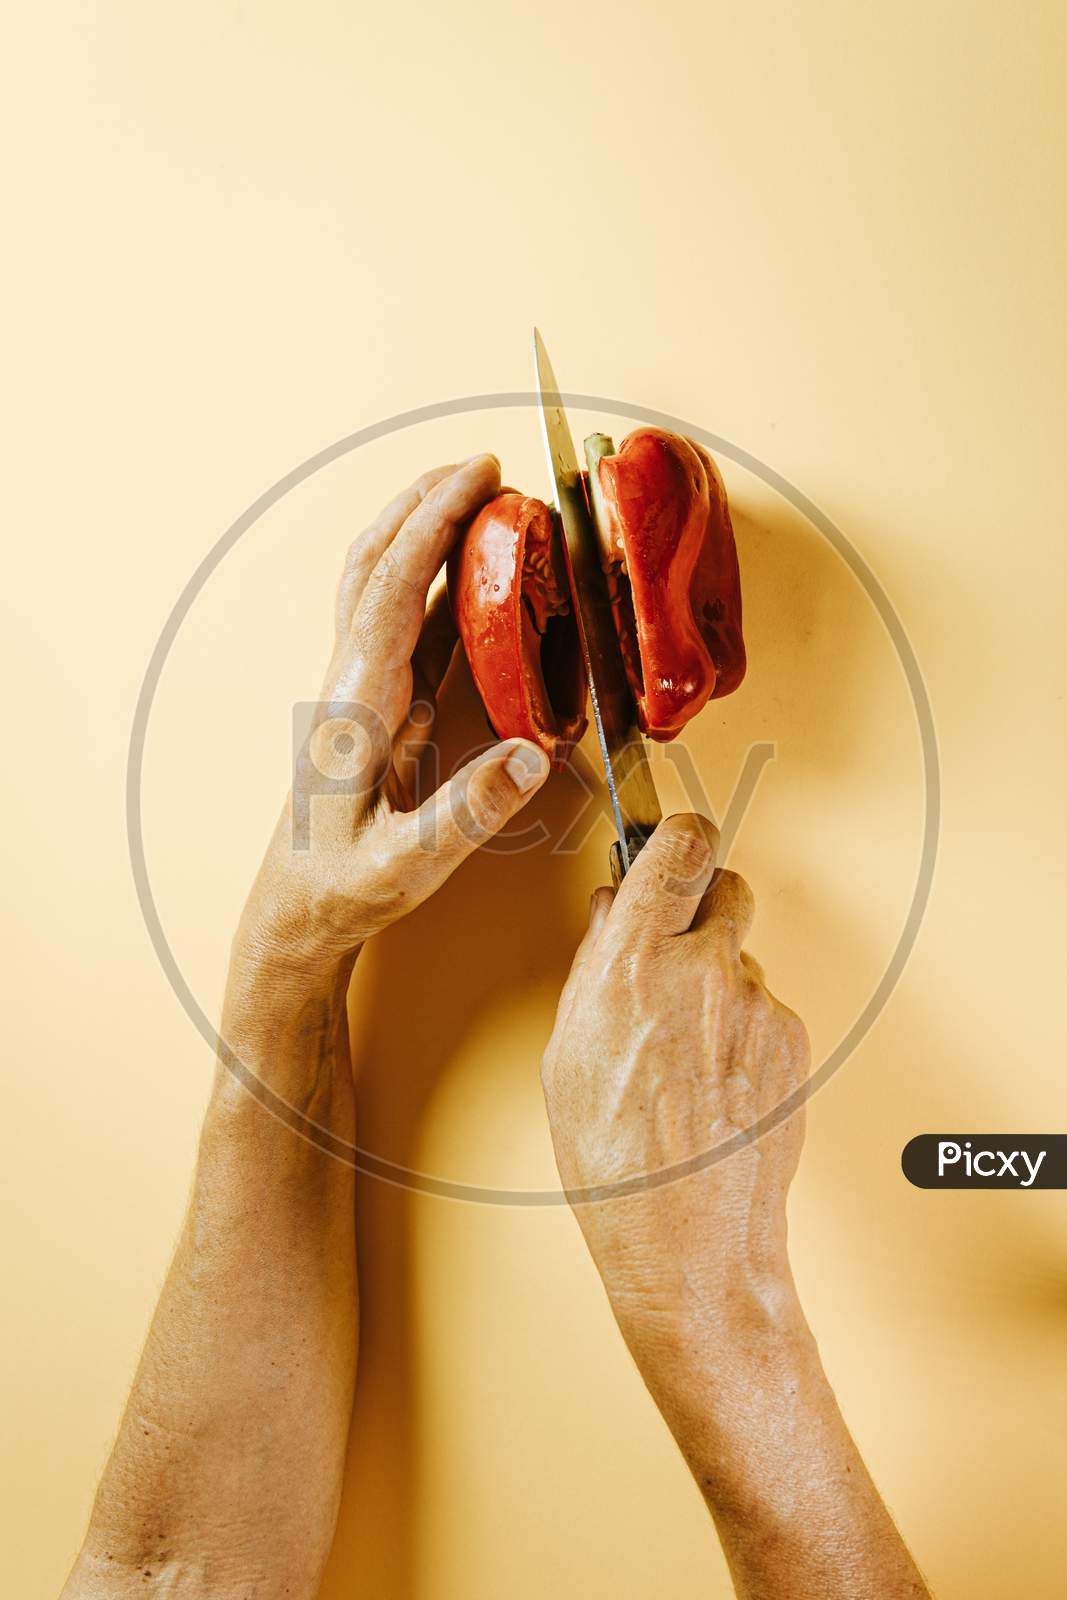 Old Woman Hands Cutting A Pepper